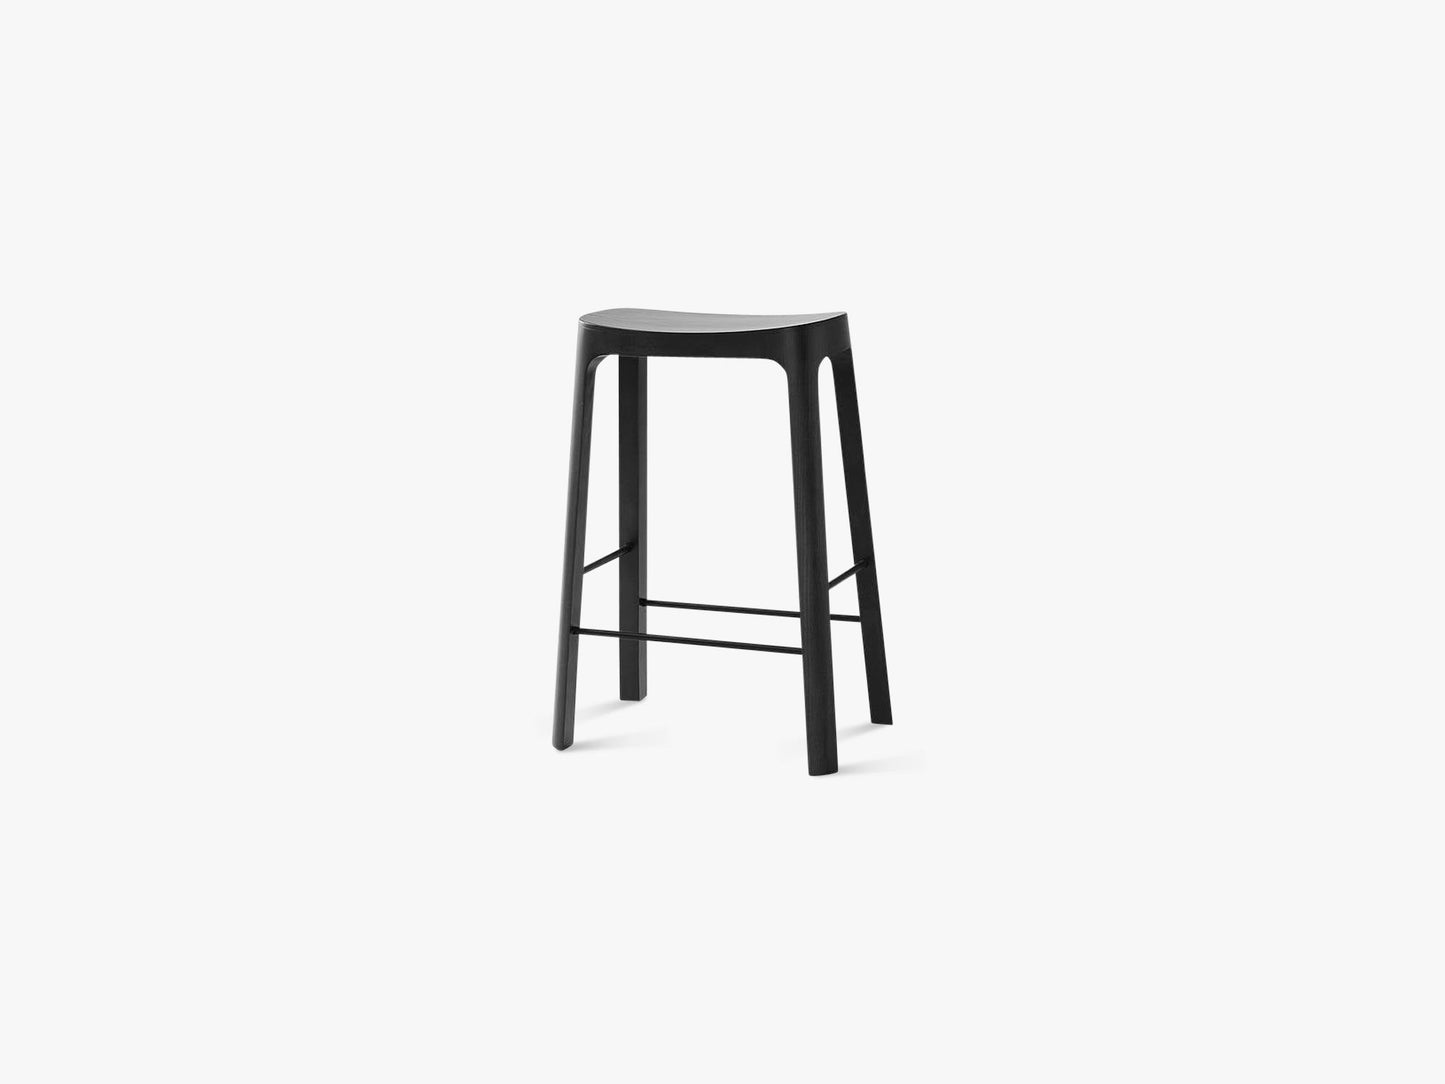 CROFTON counter stool - SH65, stained black pine wood